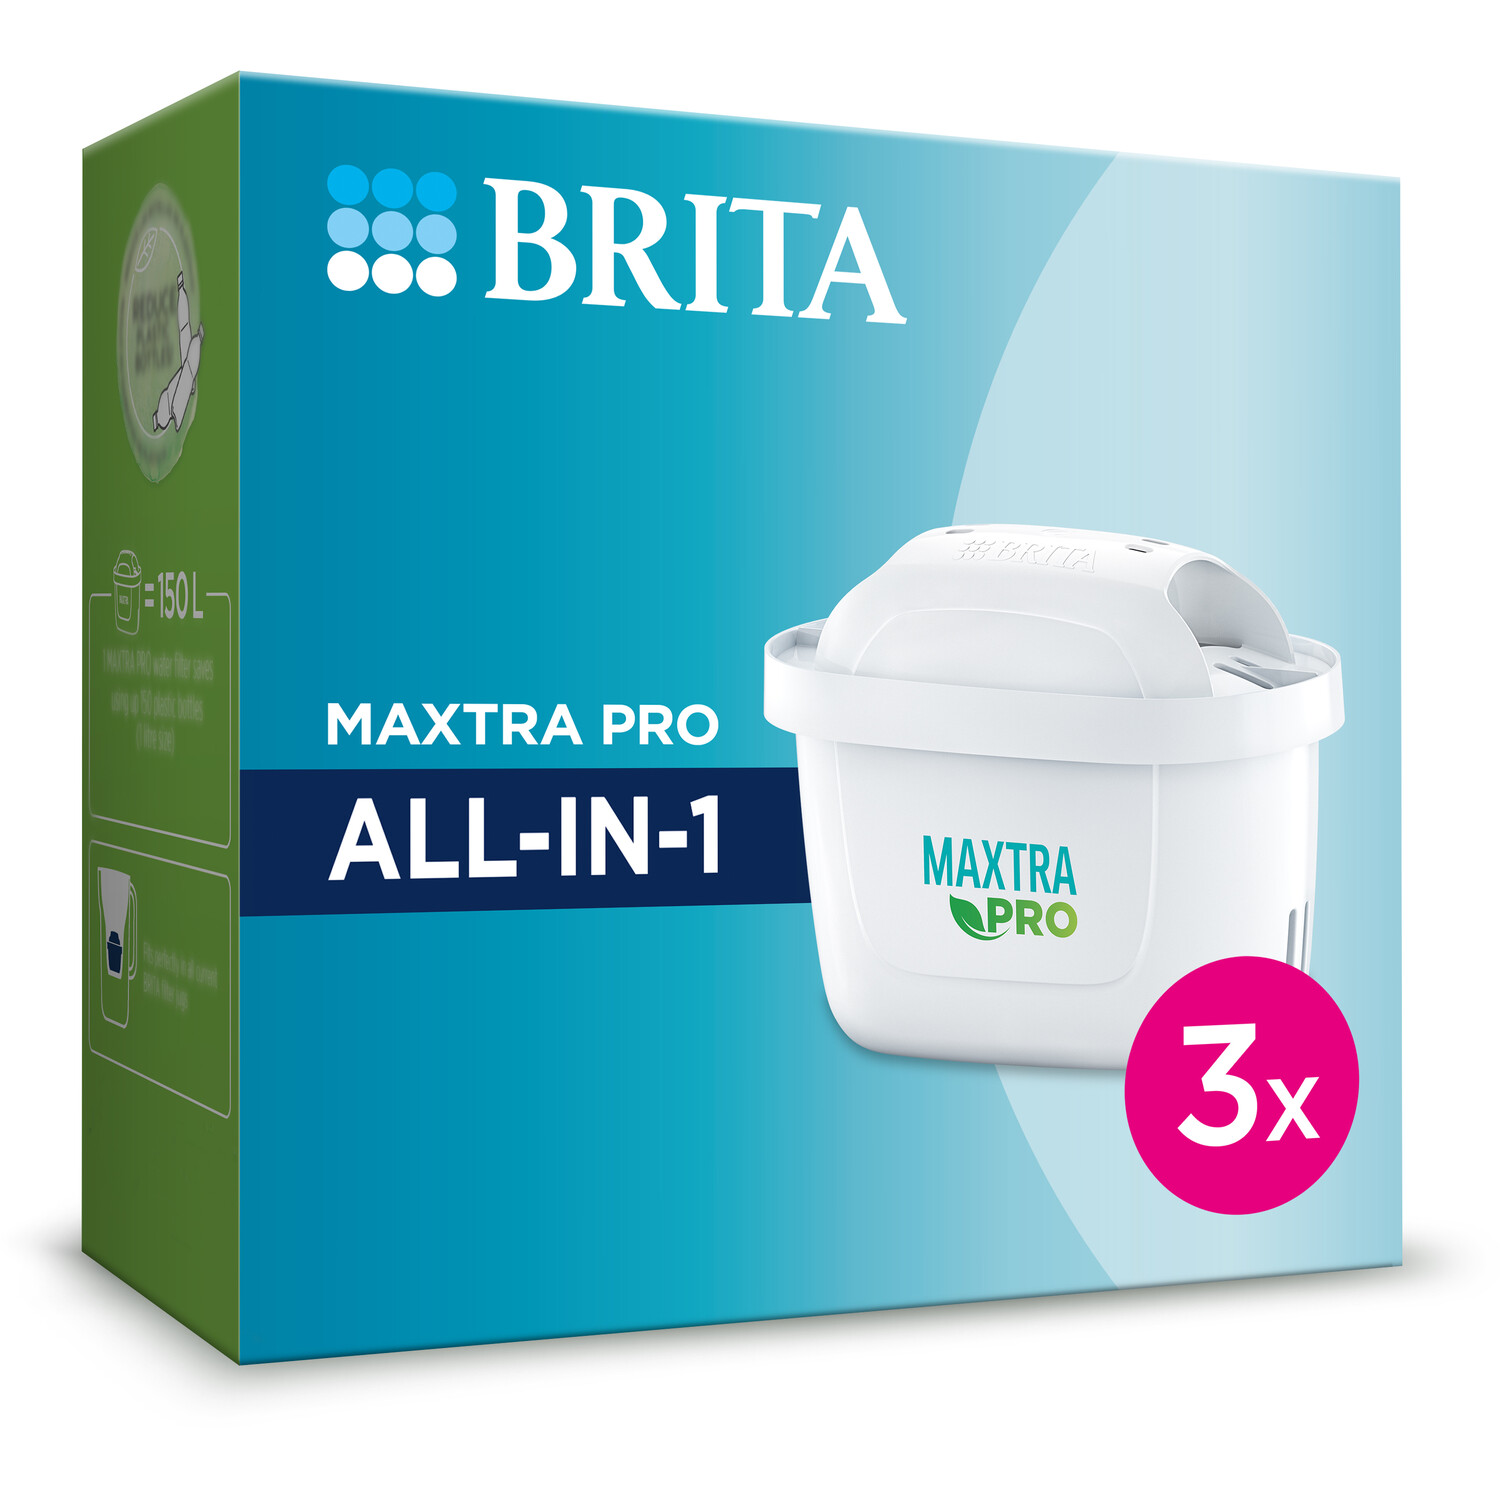 Brita Maxtra Pro All in 1 Filter Cartridge 3 Pack Image 1